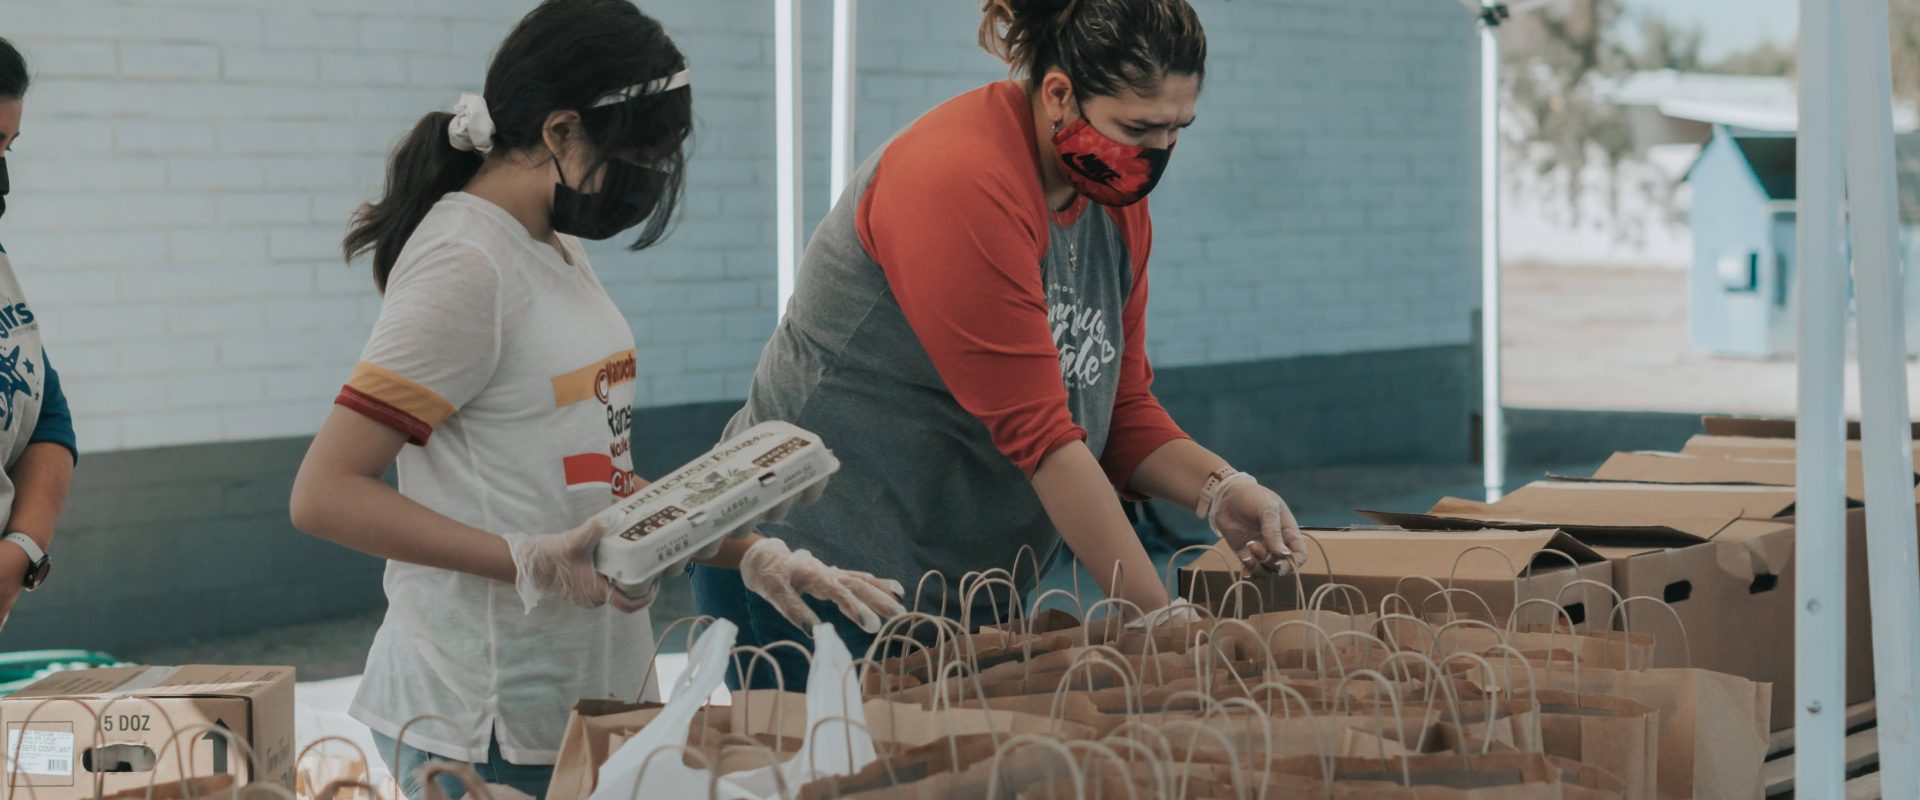 women at a charity drive preparing packages